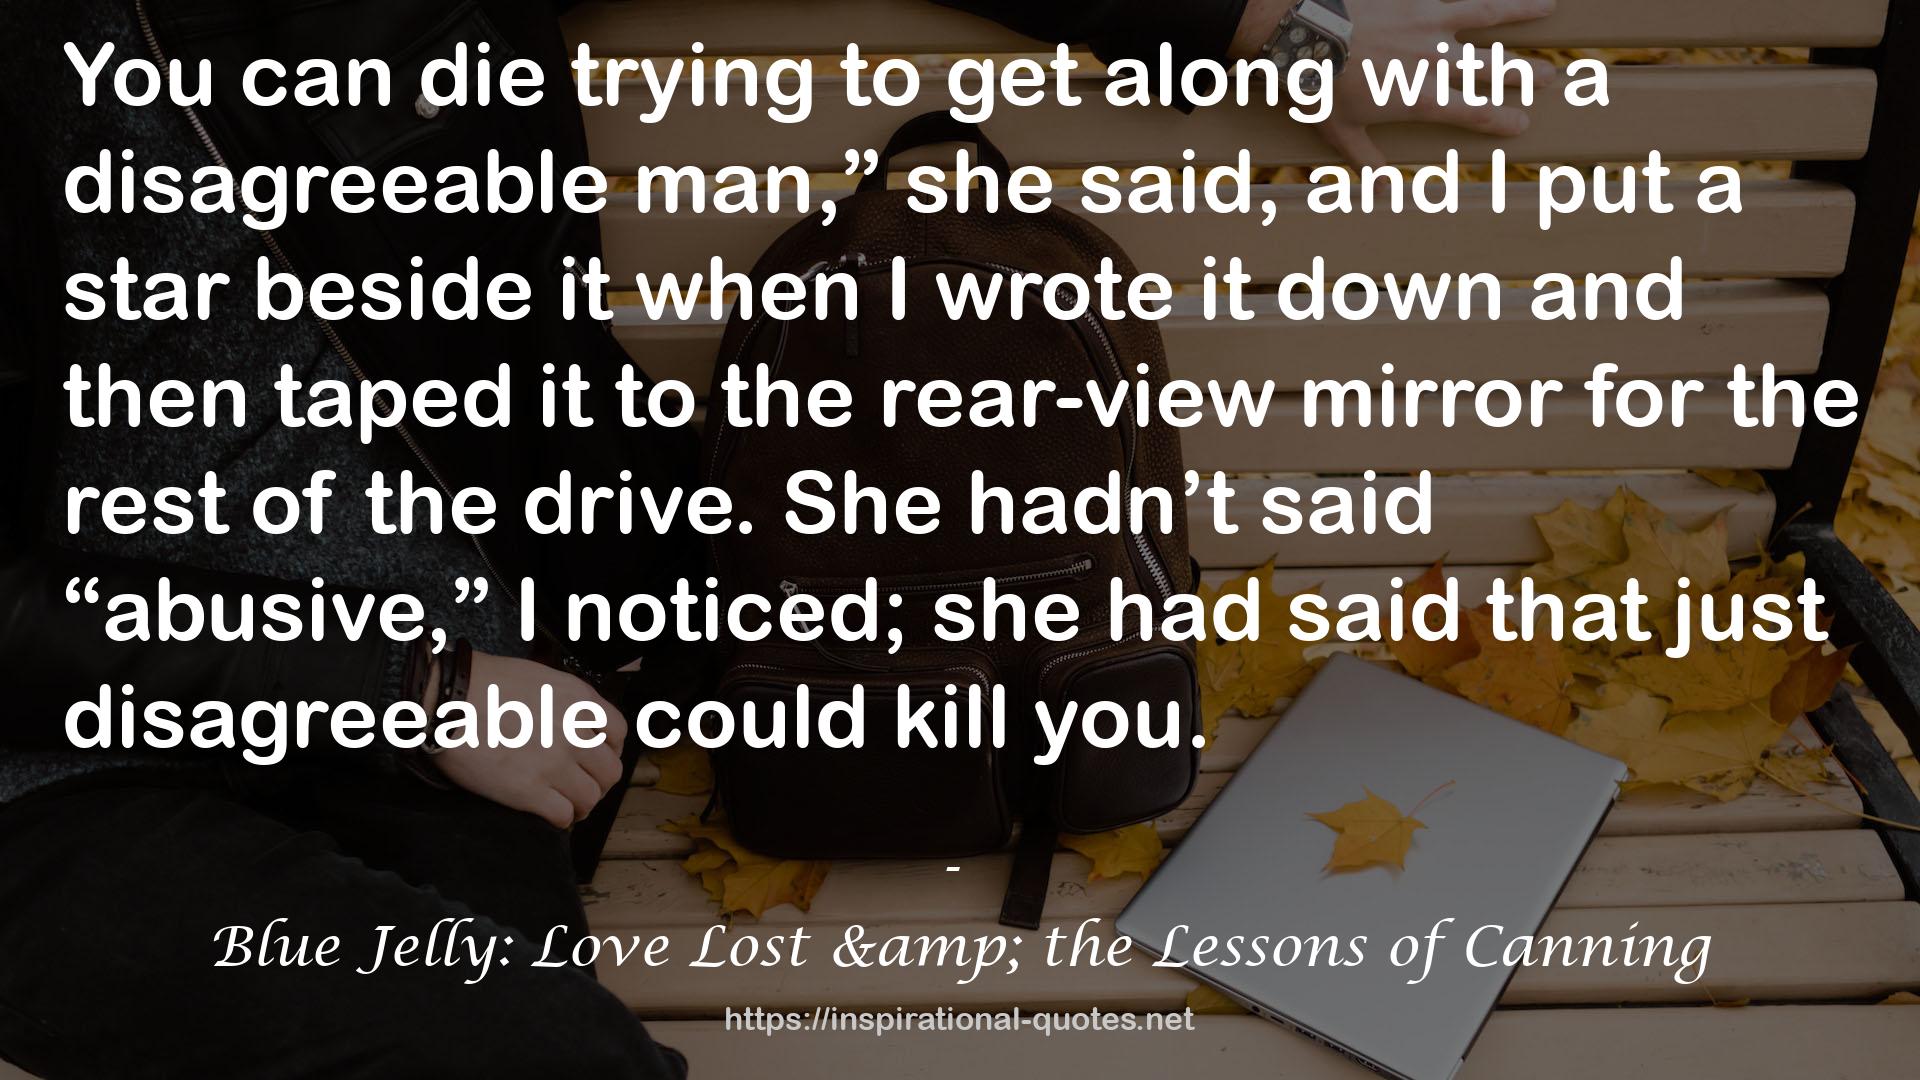 Blue Jelly: Love Lost & the Lessons of Canning QUOTES